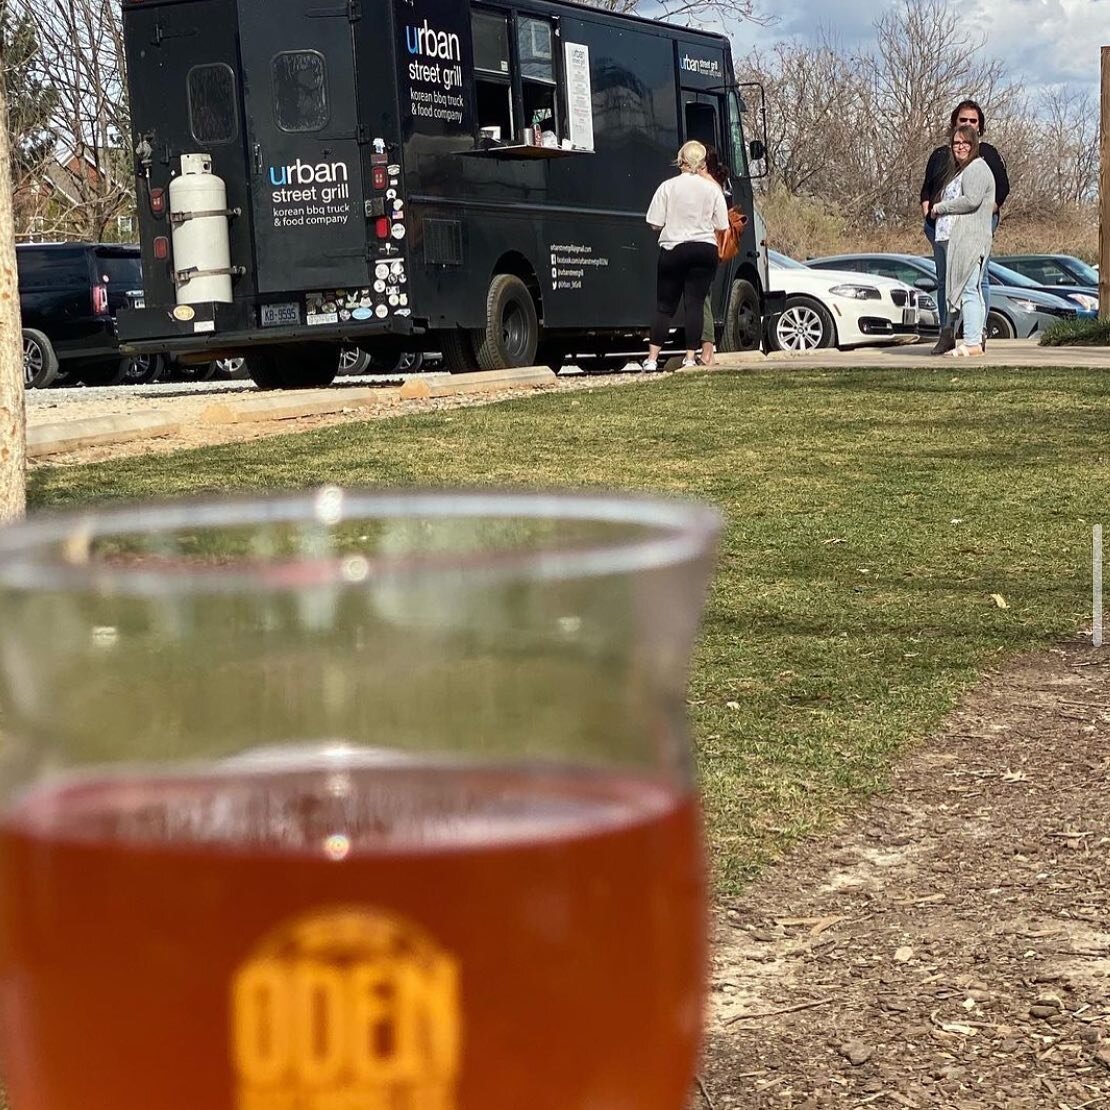 It&rsquo;s Sunday you know what that means&hellip;We&rsquo;re hanging out @odenbrewing all day enjoying some music 🎶 and mimosas 🥂! Come see us!!